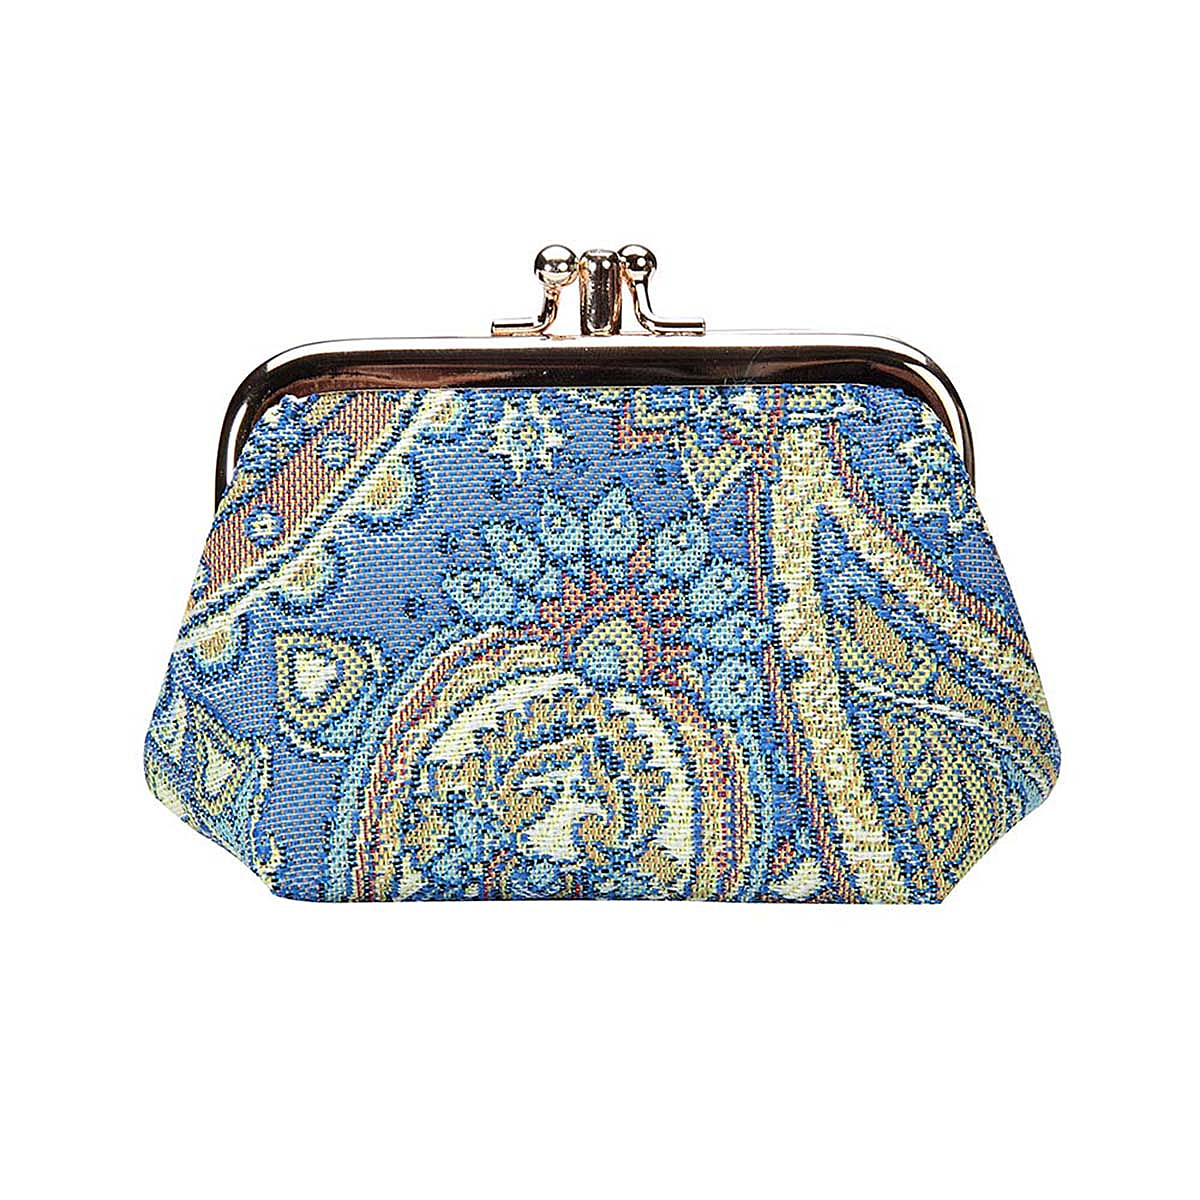 Signare Tapestry Frame Purse-Paisley - Multi